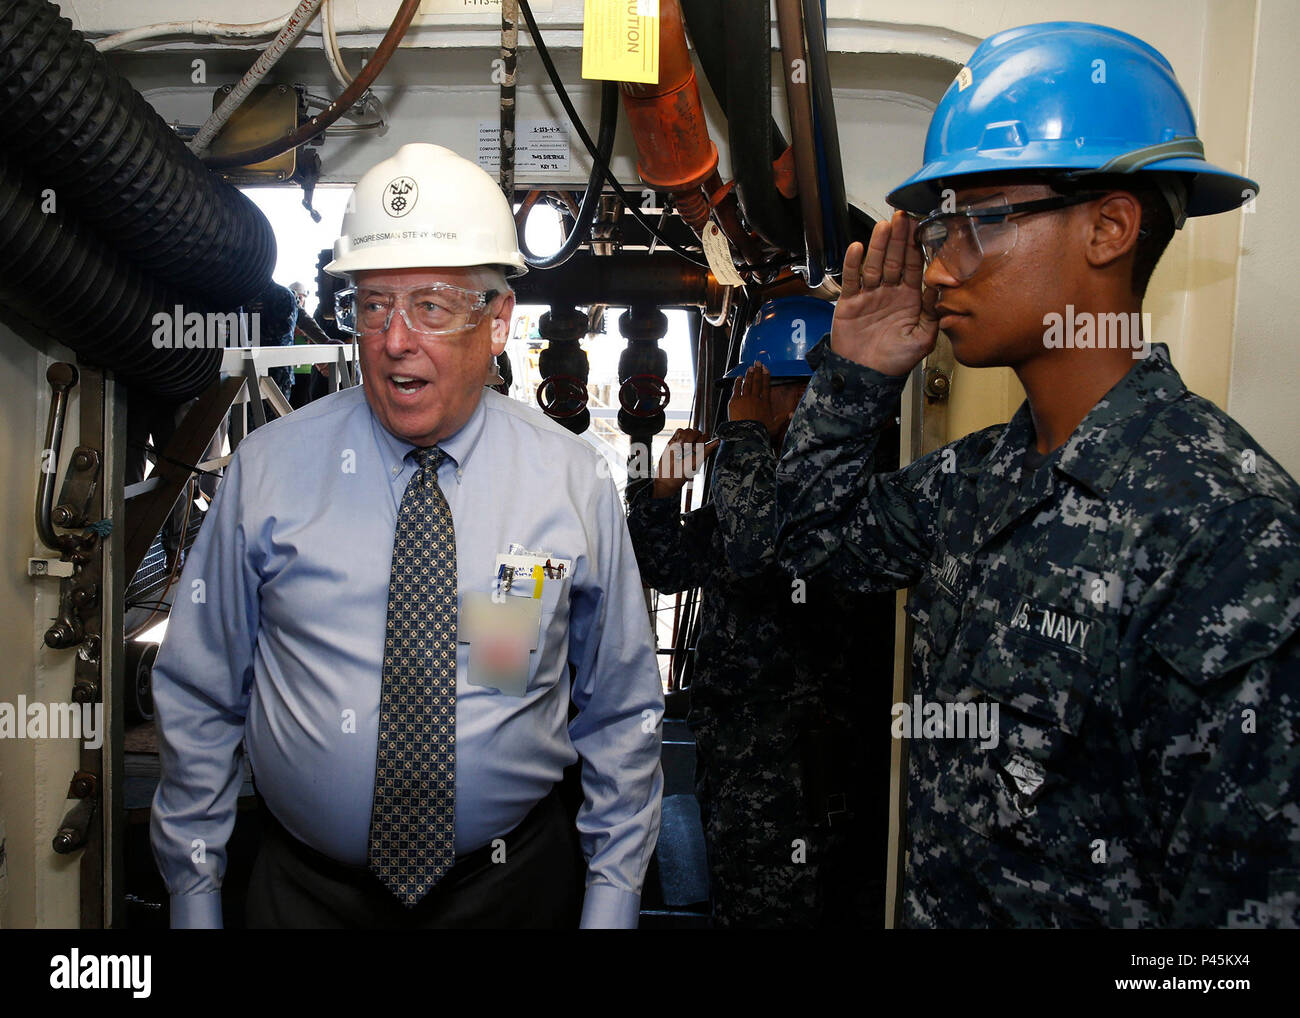 NEWPORT NEWS, VA. (June 20, 2016) Representative Steny Hoyer, Maryland's 5th Congressional District, visits Pre-Commissioning Unit Gerald R. Ford (CVN 78), to see the technological advances aboard the ship. Ford is the first of its class and under construction at Huntington Ingalls Industries Newport News Shipbuilding. (U.S. Navy photo by Mass Communication Specialist 3rd Class Matthew R. Fairchild/Released) (This image was altered for security purpose by blurring out security badges) Stock Photo